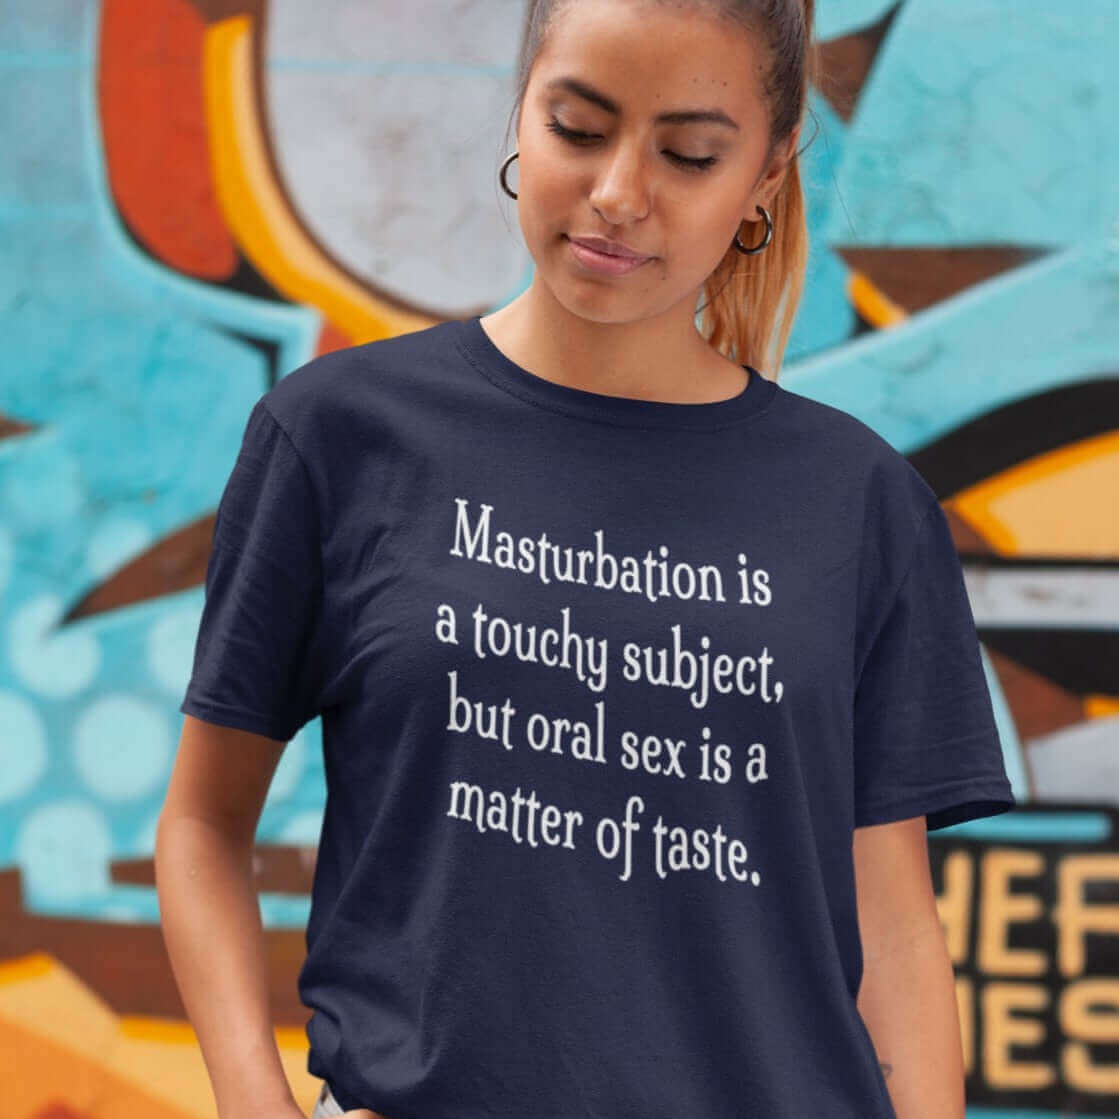 Woman wearing a navy blue t-shirt with the suggestive phrase Masturbation is a touchy subject, but oral sex is a matter of taste printed on the front.